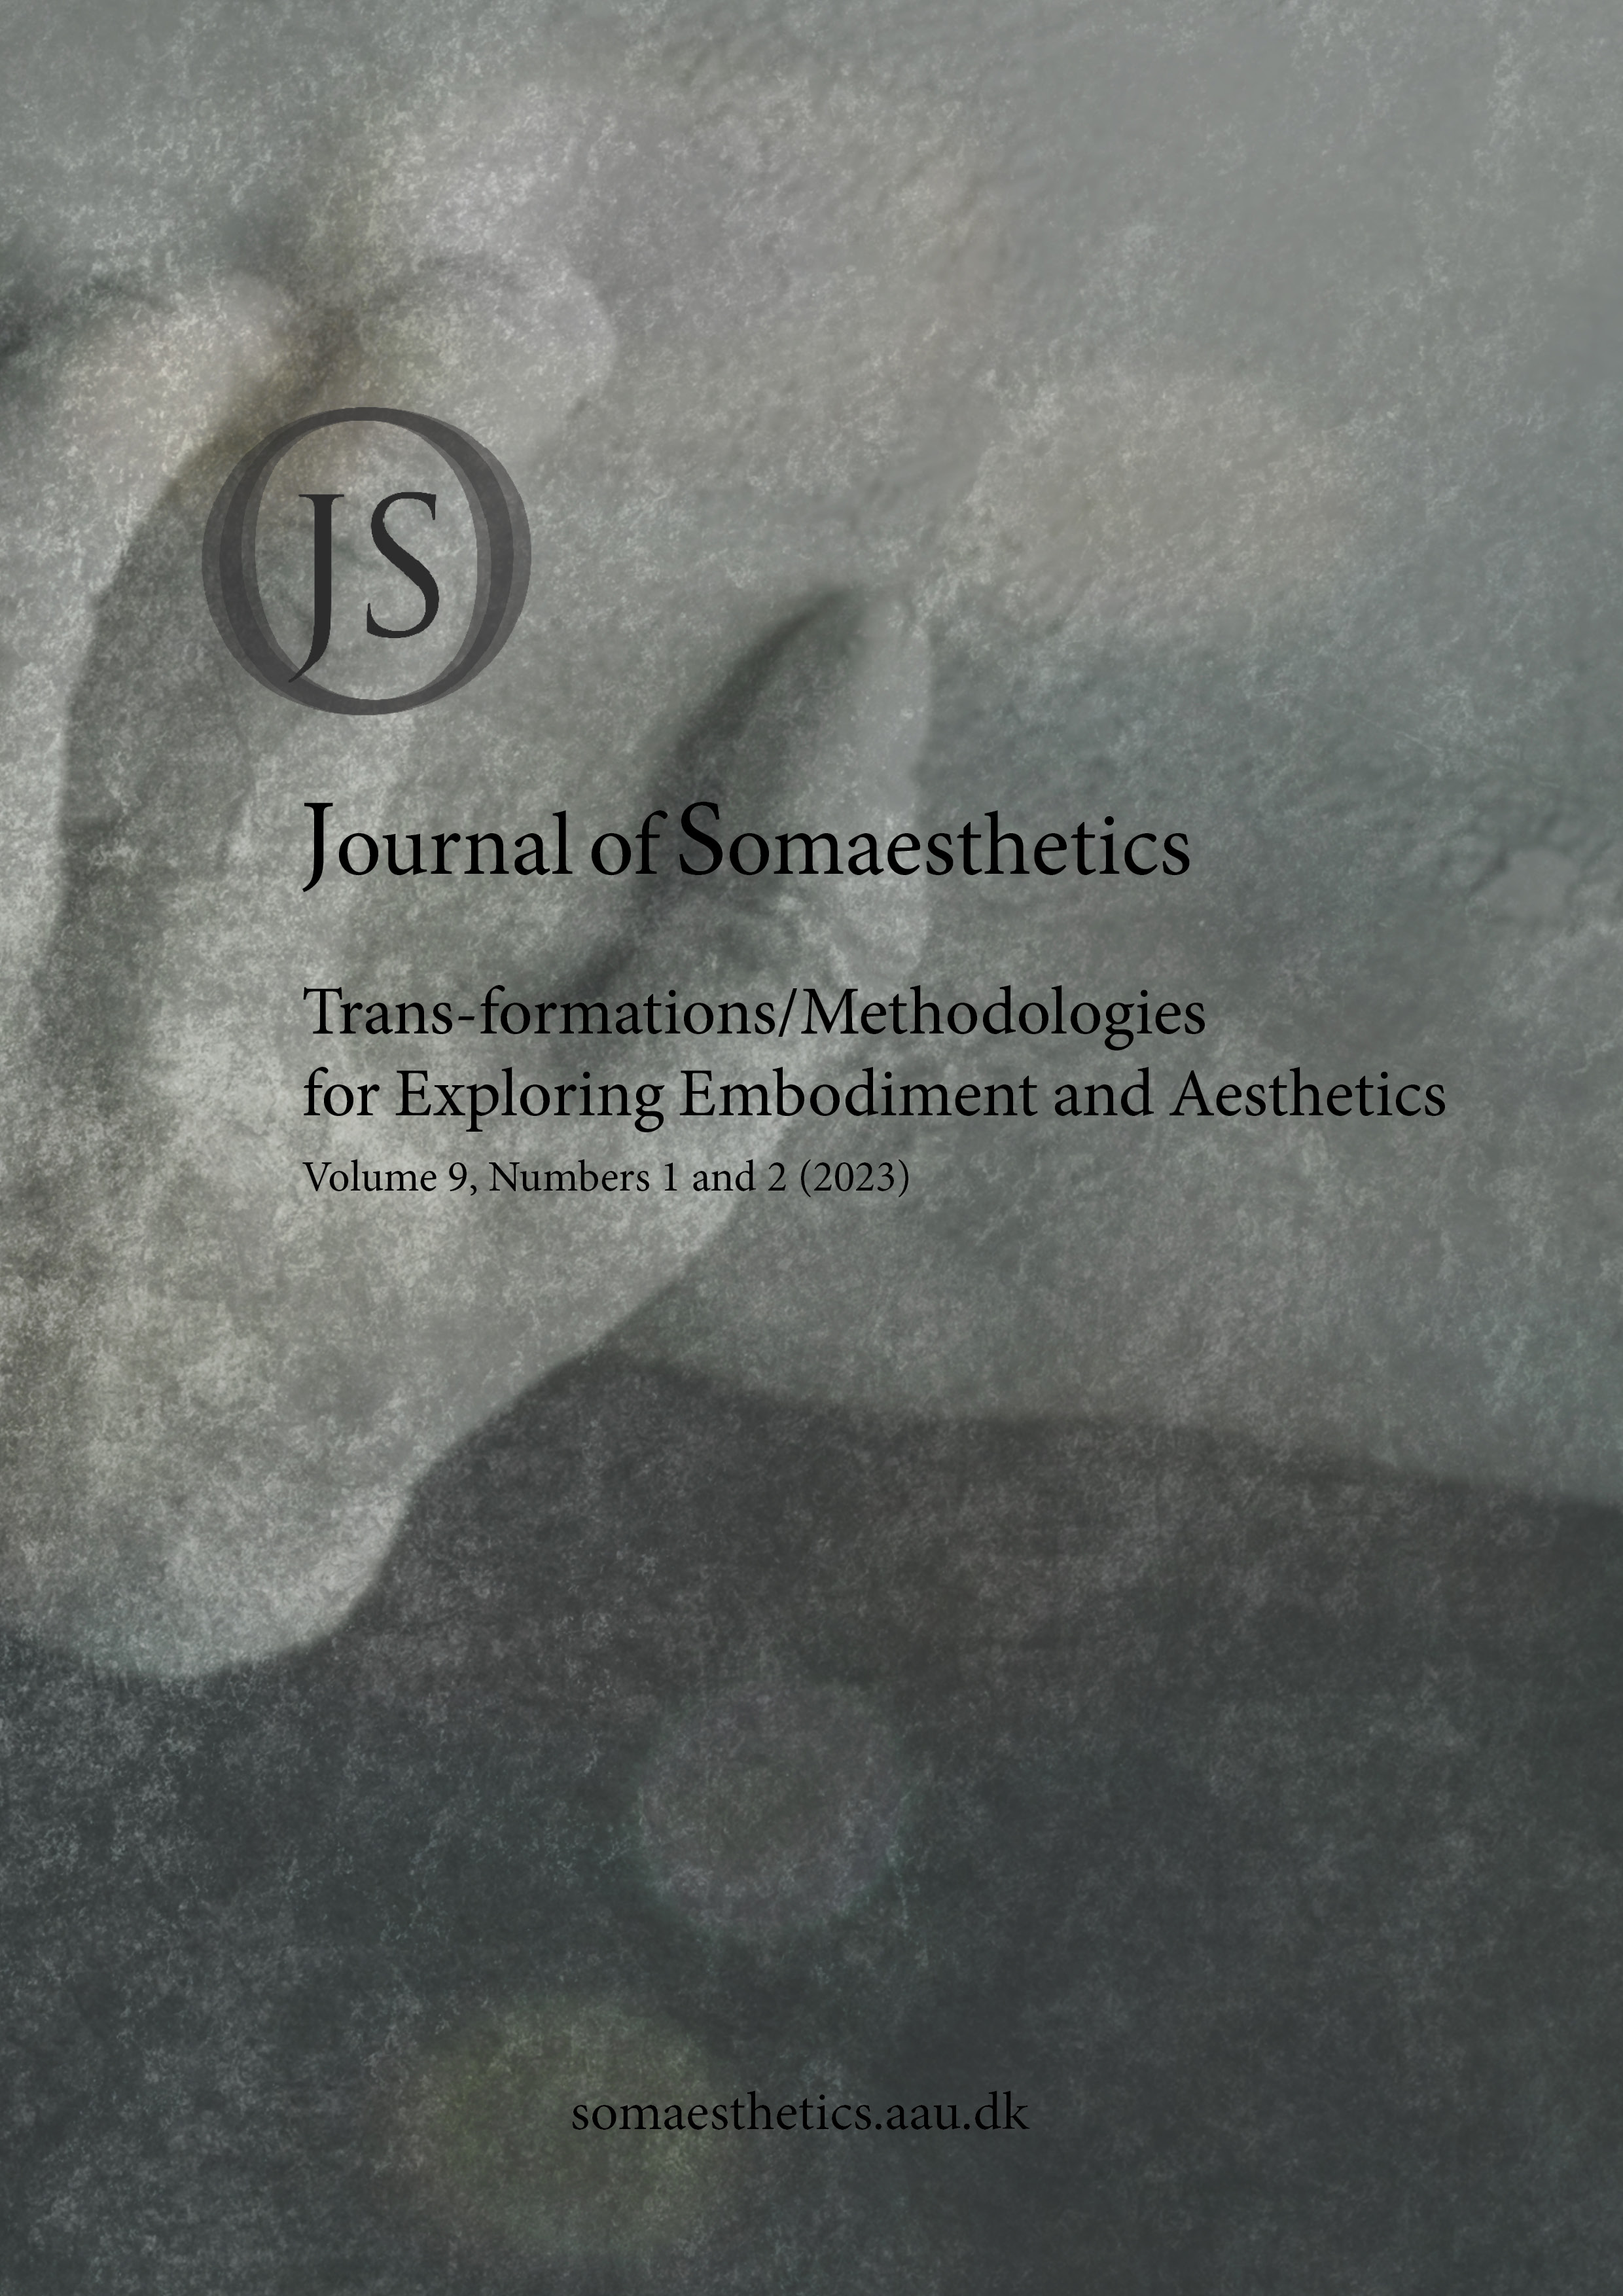 					View Vol. 9 No. 1/2 (2023): Somaesthetic Self-Care and the Politics of Taste and Transformation/Methodologies for Exploring Embodiment and Aesthetics
				